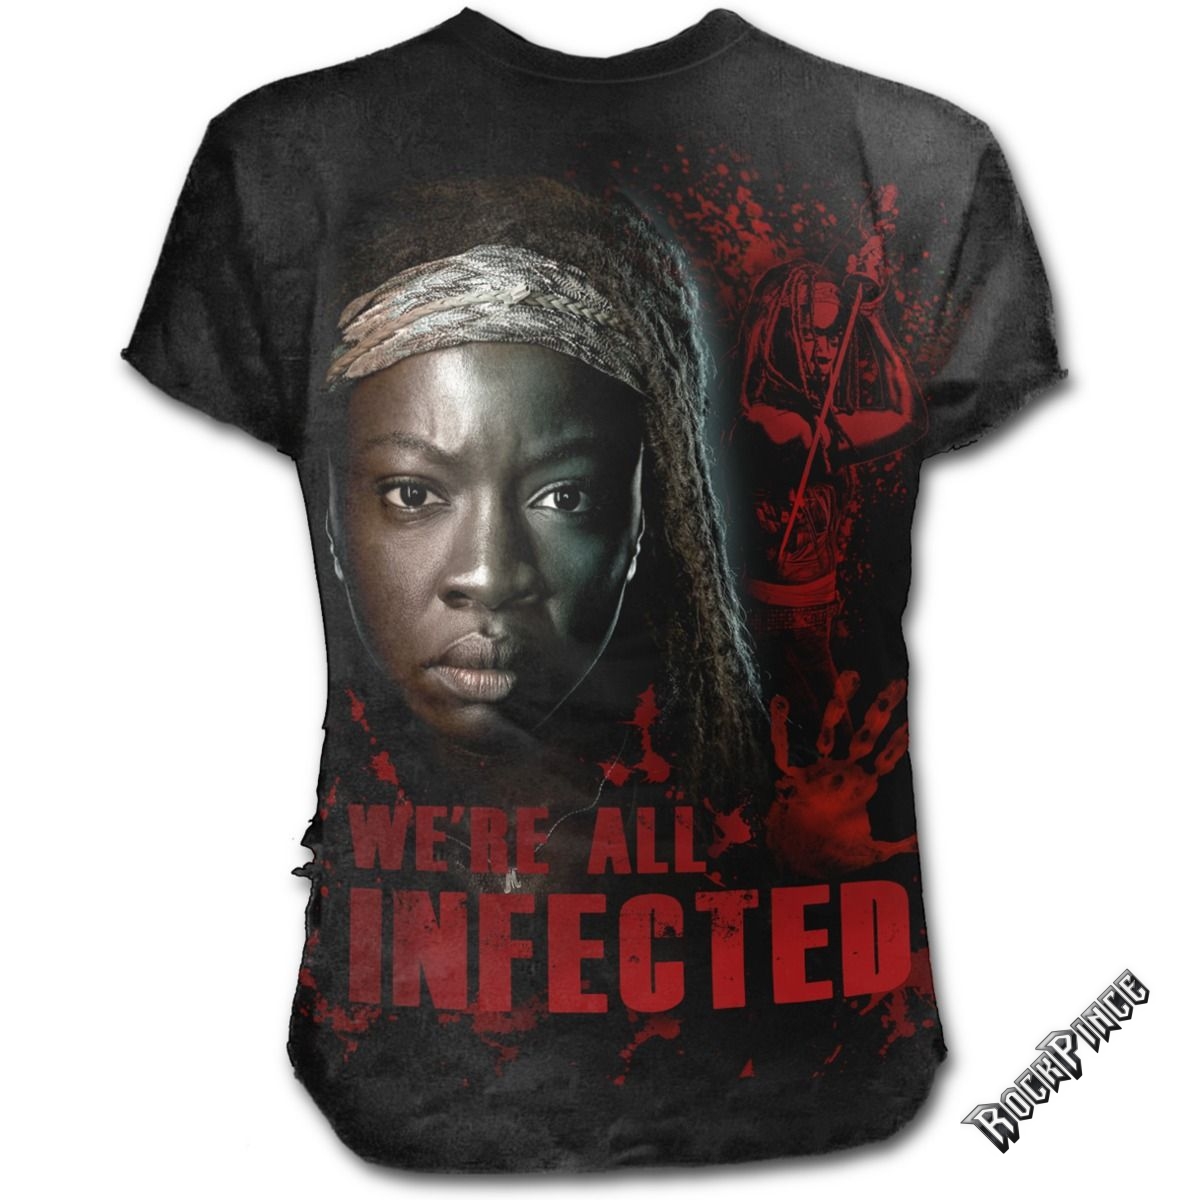 The Walking Dead - MICHONNE - ALL INFECTED - Ripped T-Shirt Black (Plain) - G003M125